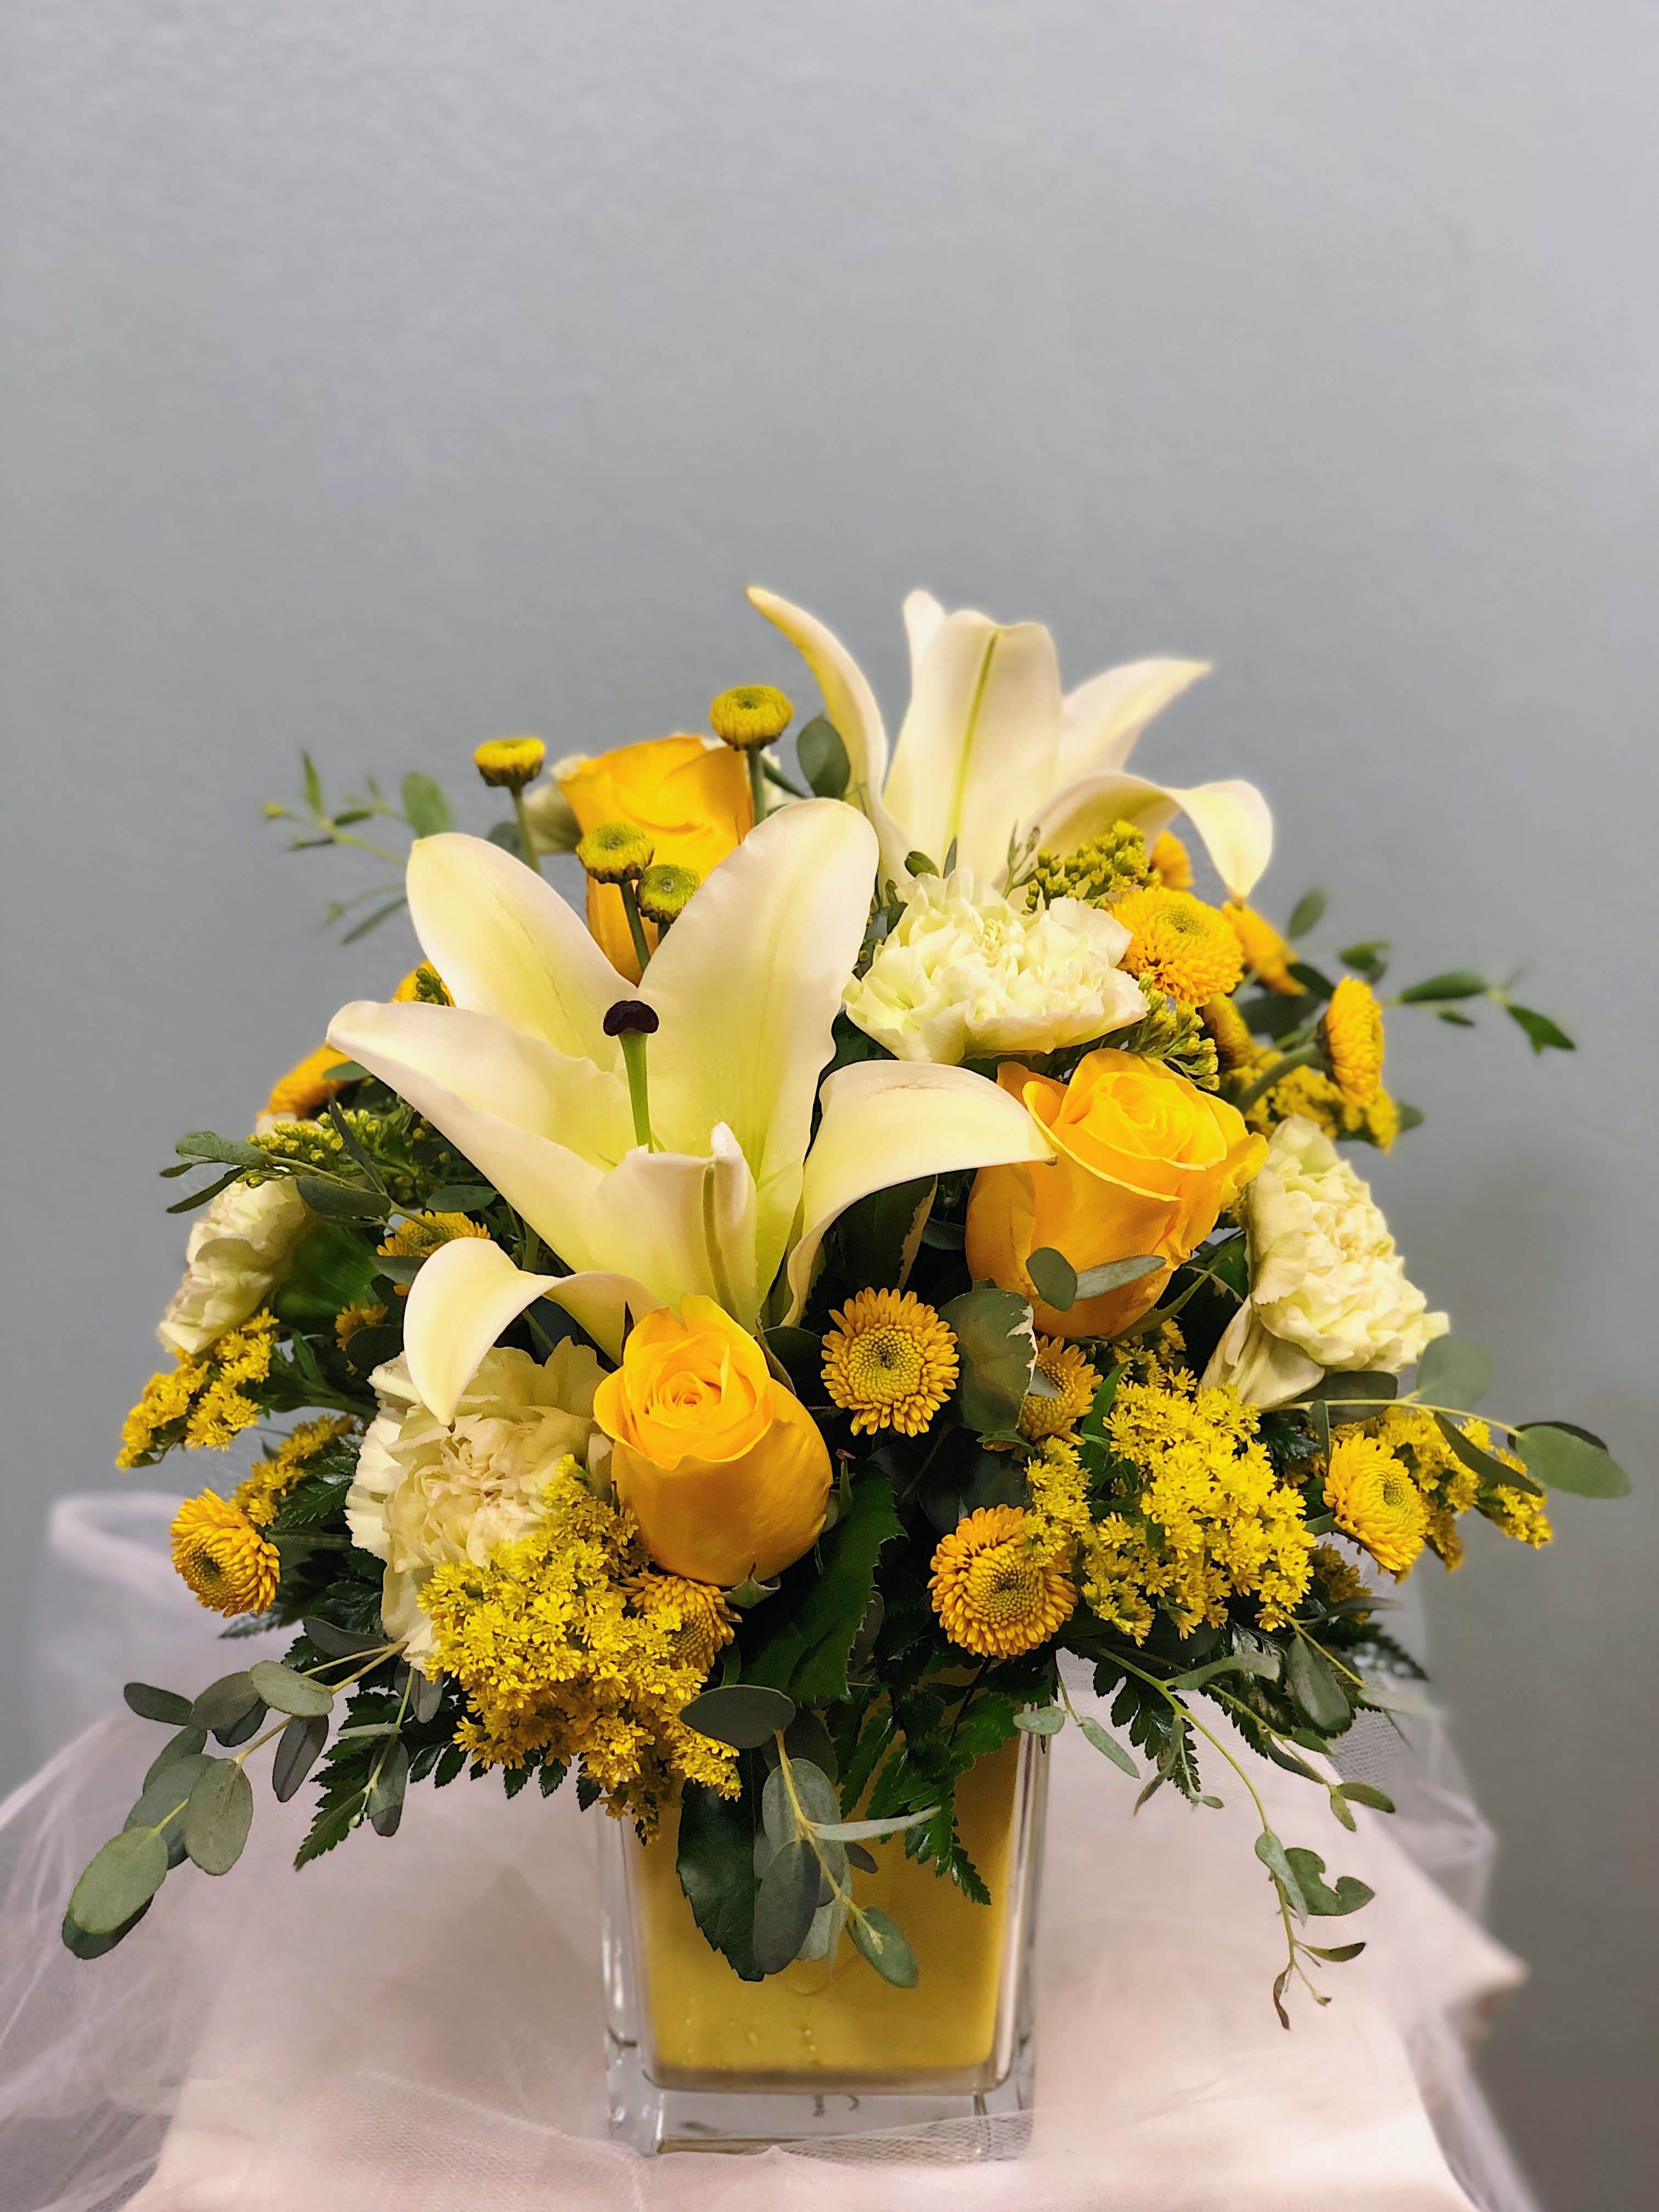 Happy and Yellow  - Happy and Yellow describes this arrangement perfectly! This will be sure to brighten even the gloomiest day! Happy and Yellow is a mixture of all flowers yellow! Two pale yellow lilies take center stage surrounded by three bright yellow roses, four pale yellow carnations, and yellow buttons and solidago for accent flowers. Sprigs of gunni eucalyptus and green leather leaf fill out the arrangement. Happy and Yellow even comes designed in a yellow keepsake cube! 